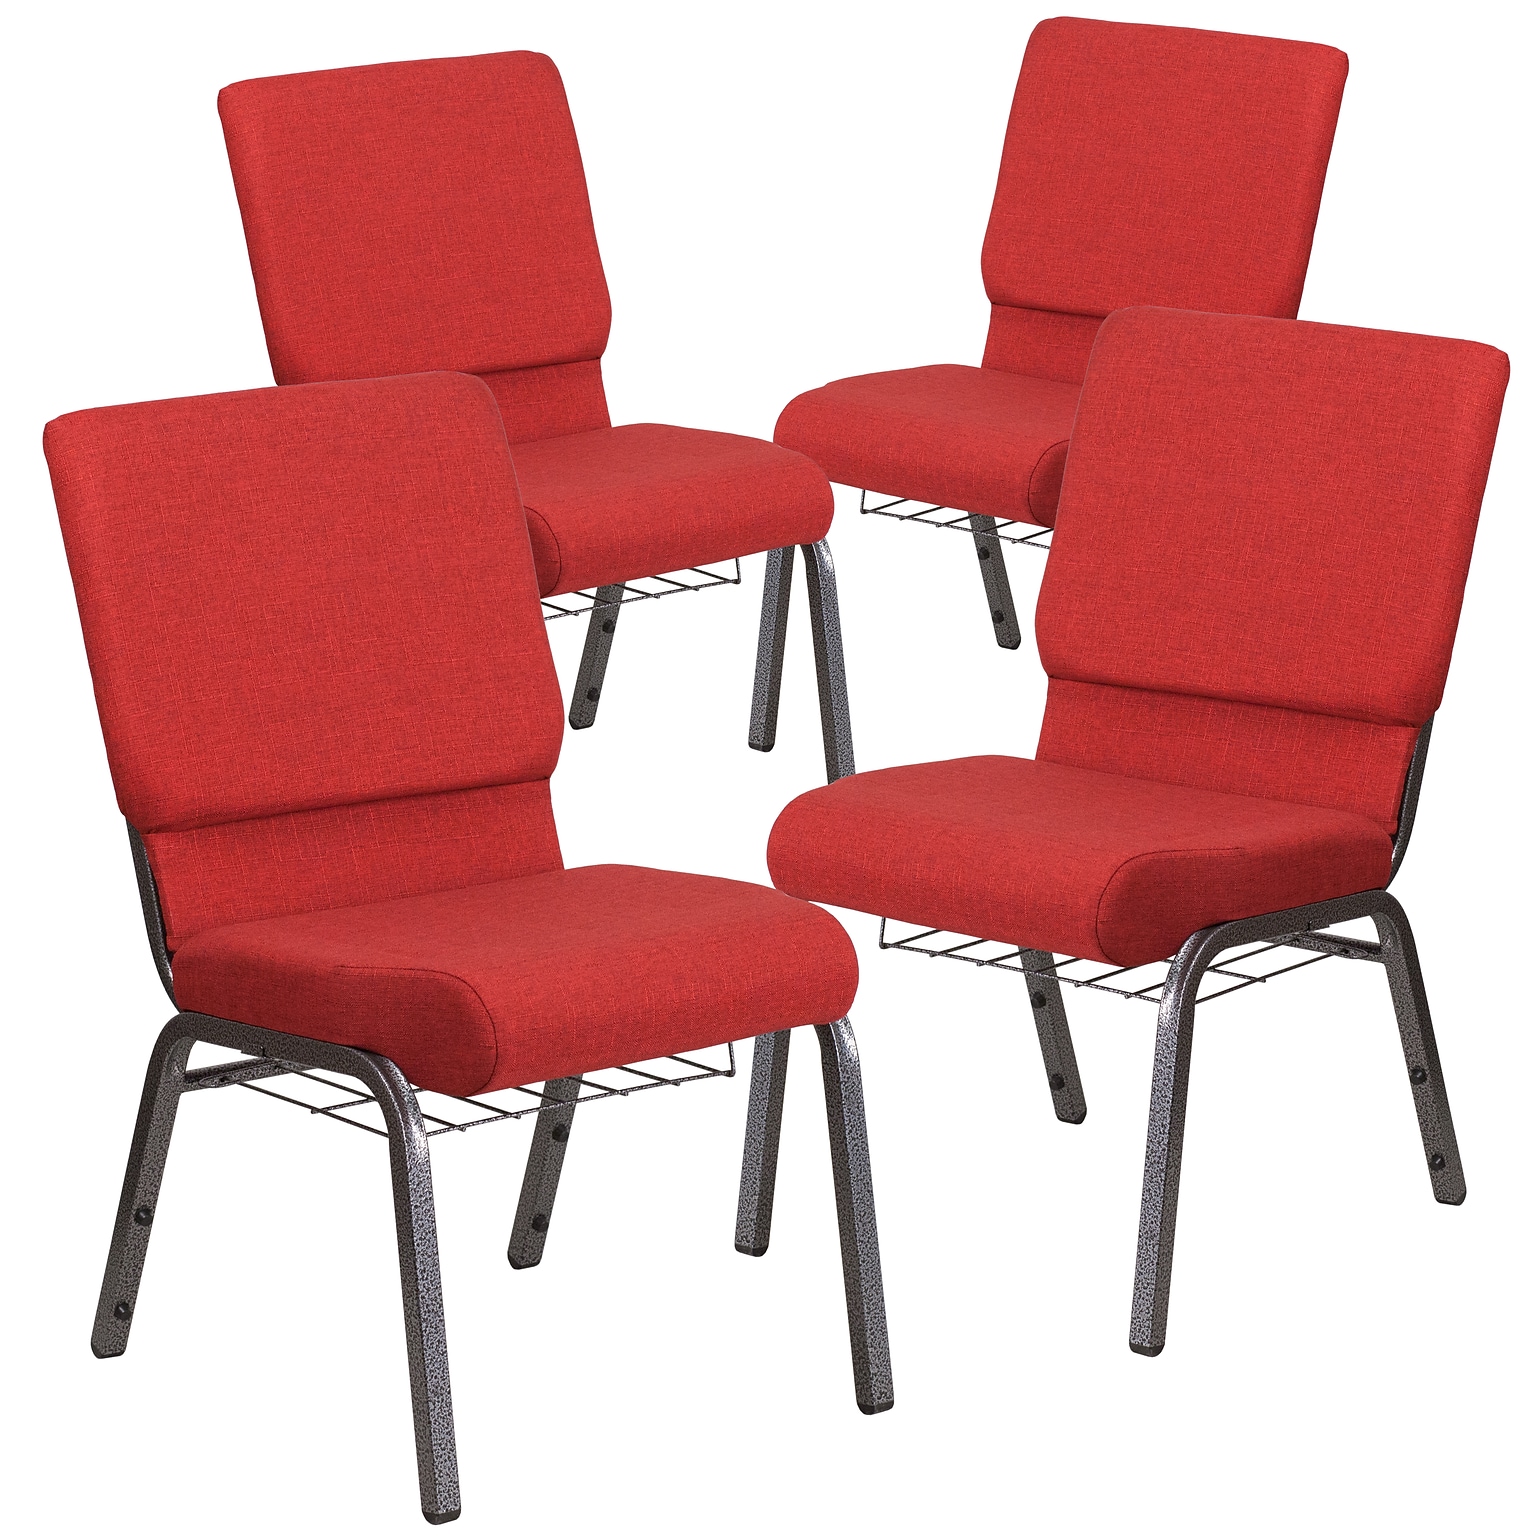 Flash Furniture HERCULES Series Fabric Church Stacking Chair with Book Rack, Red/Silver Vein Frame, 4 Pack(4FCH185SVREDB)